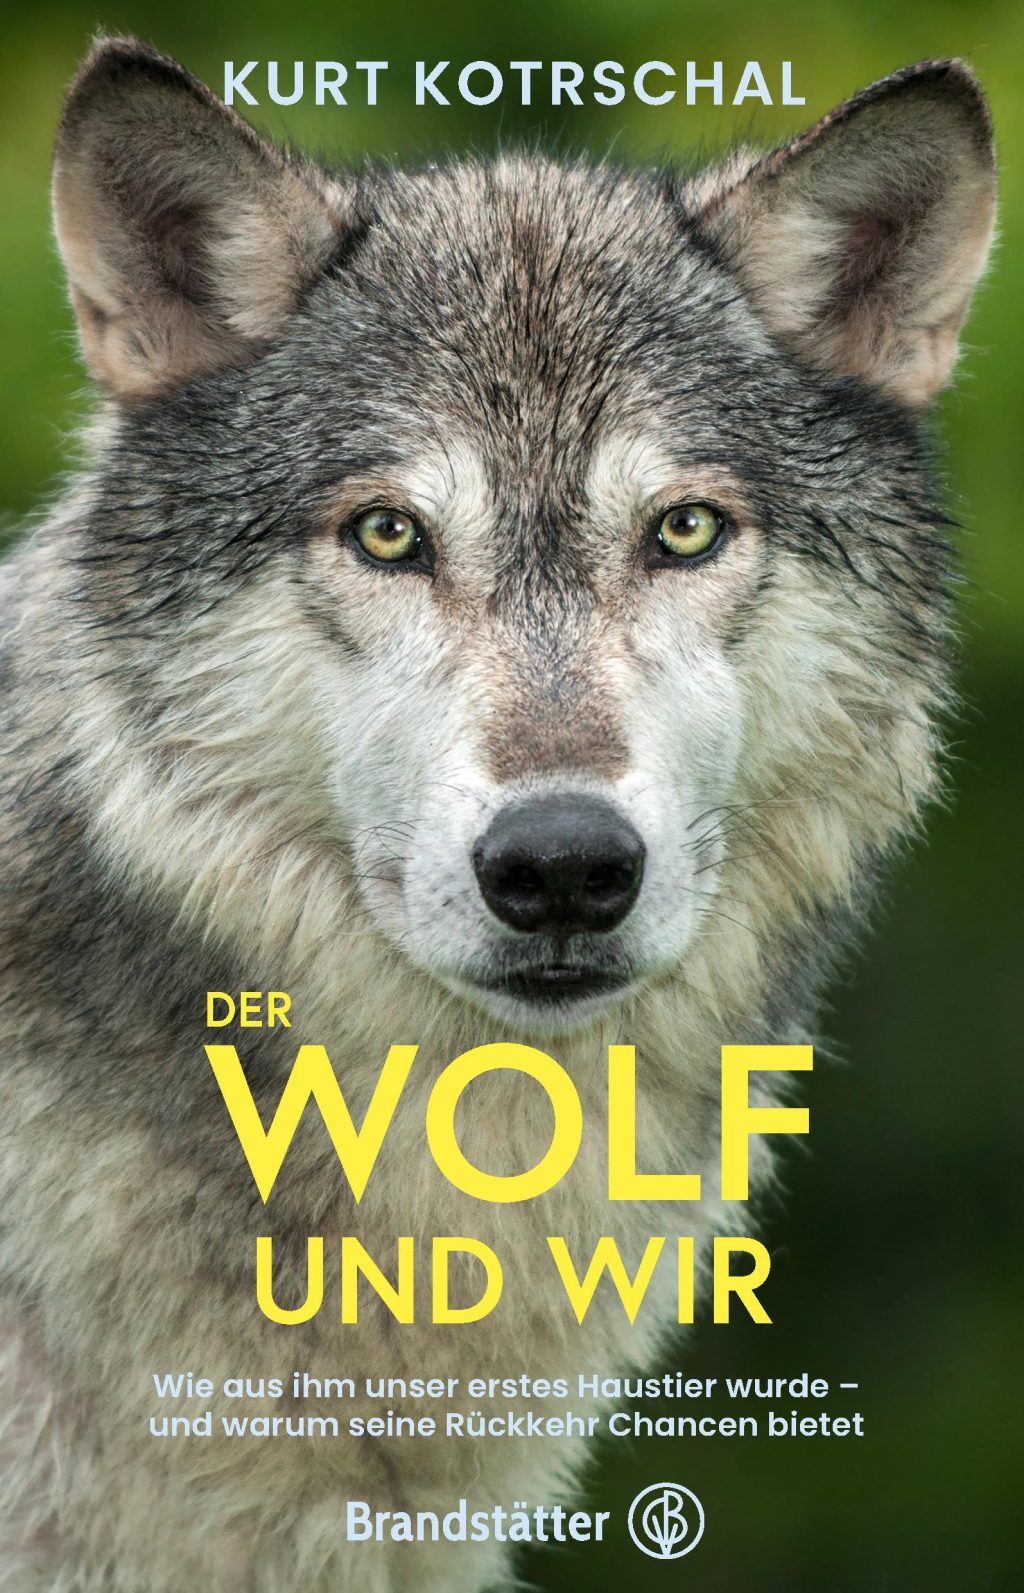 Review of the book "The Wolf and Us"